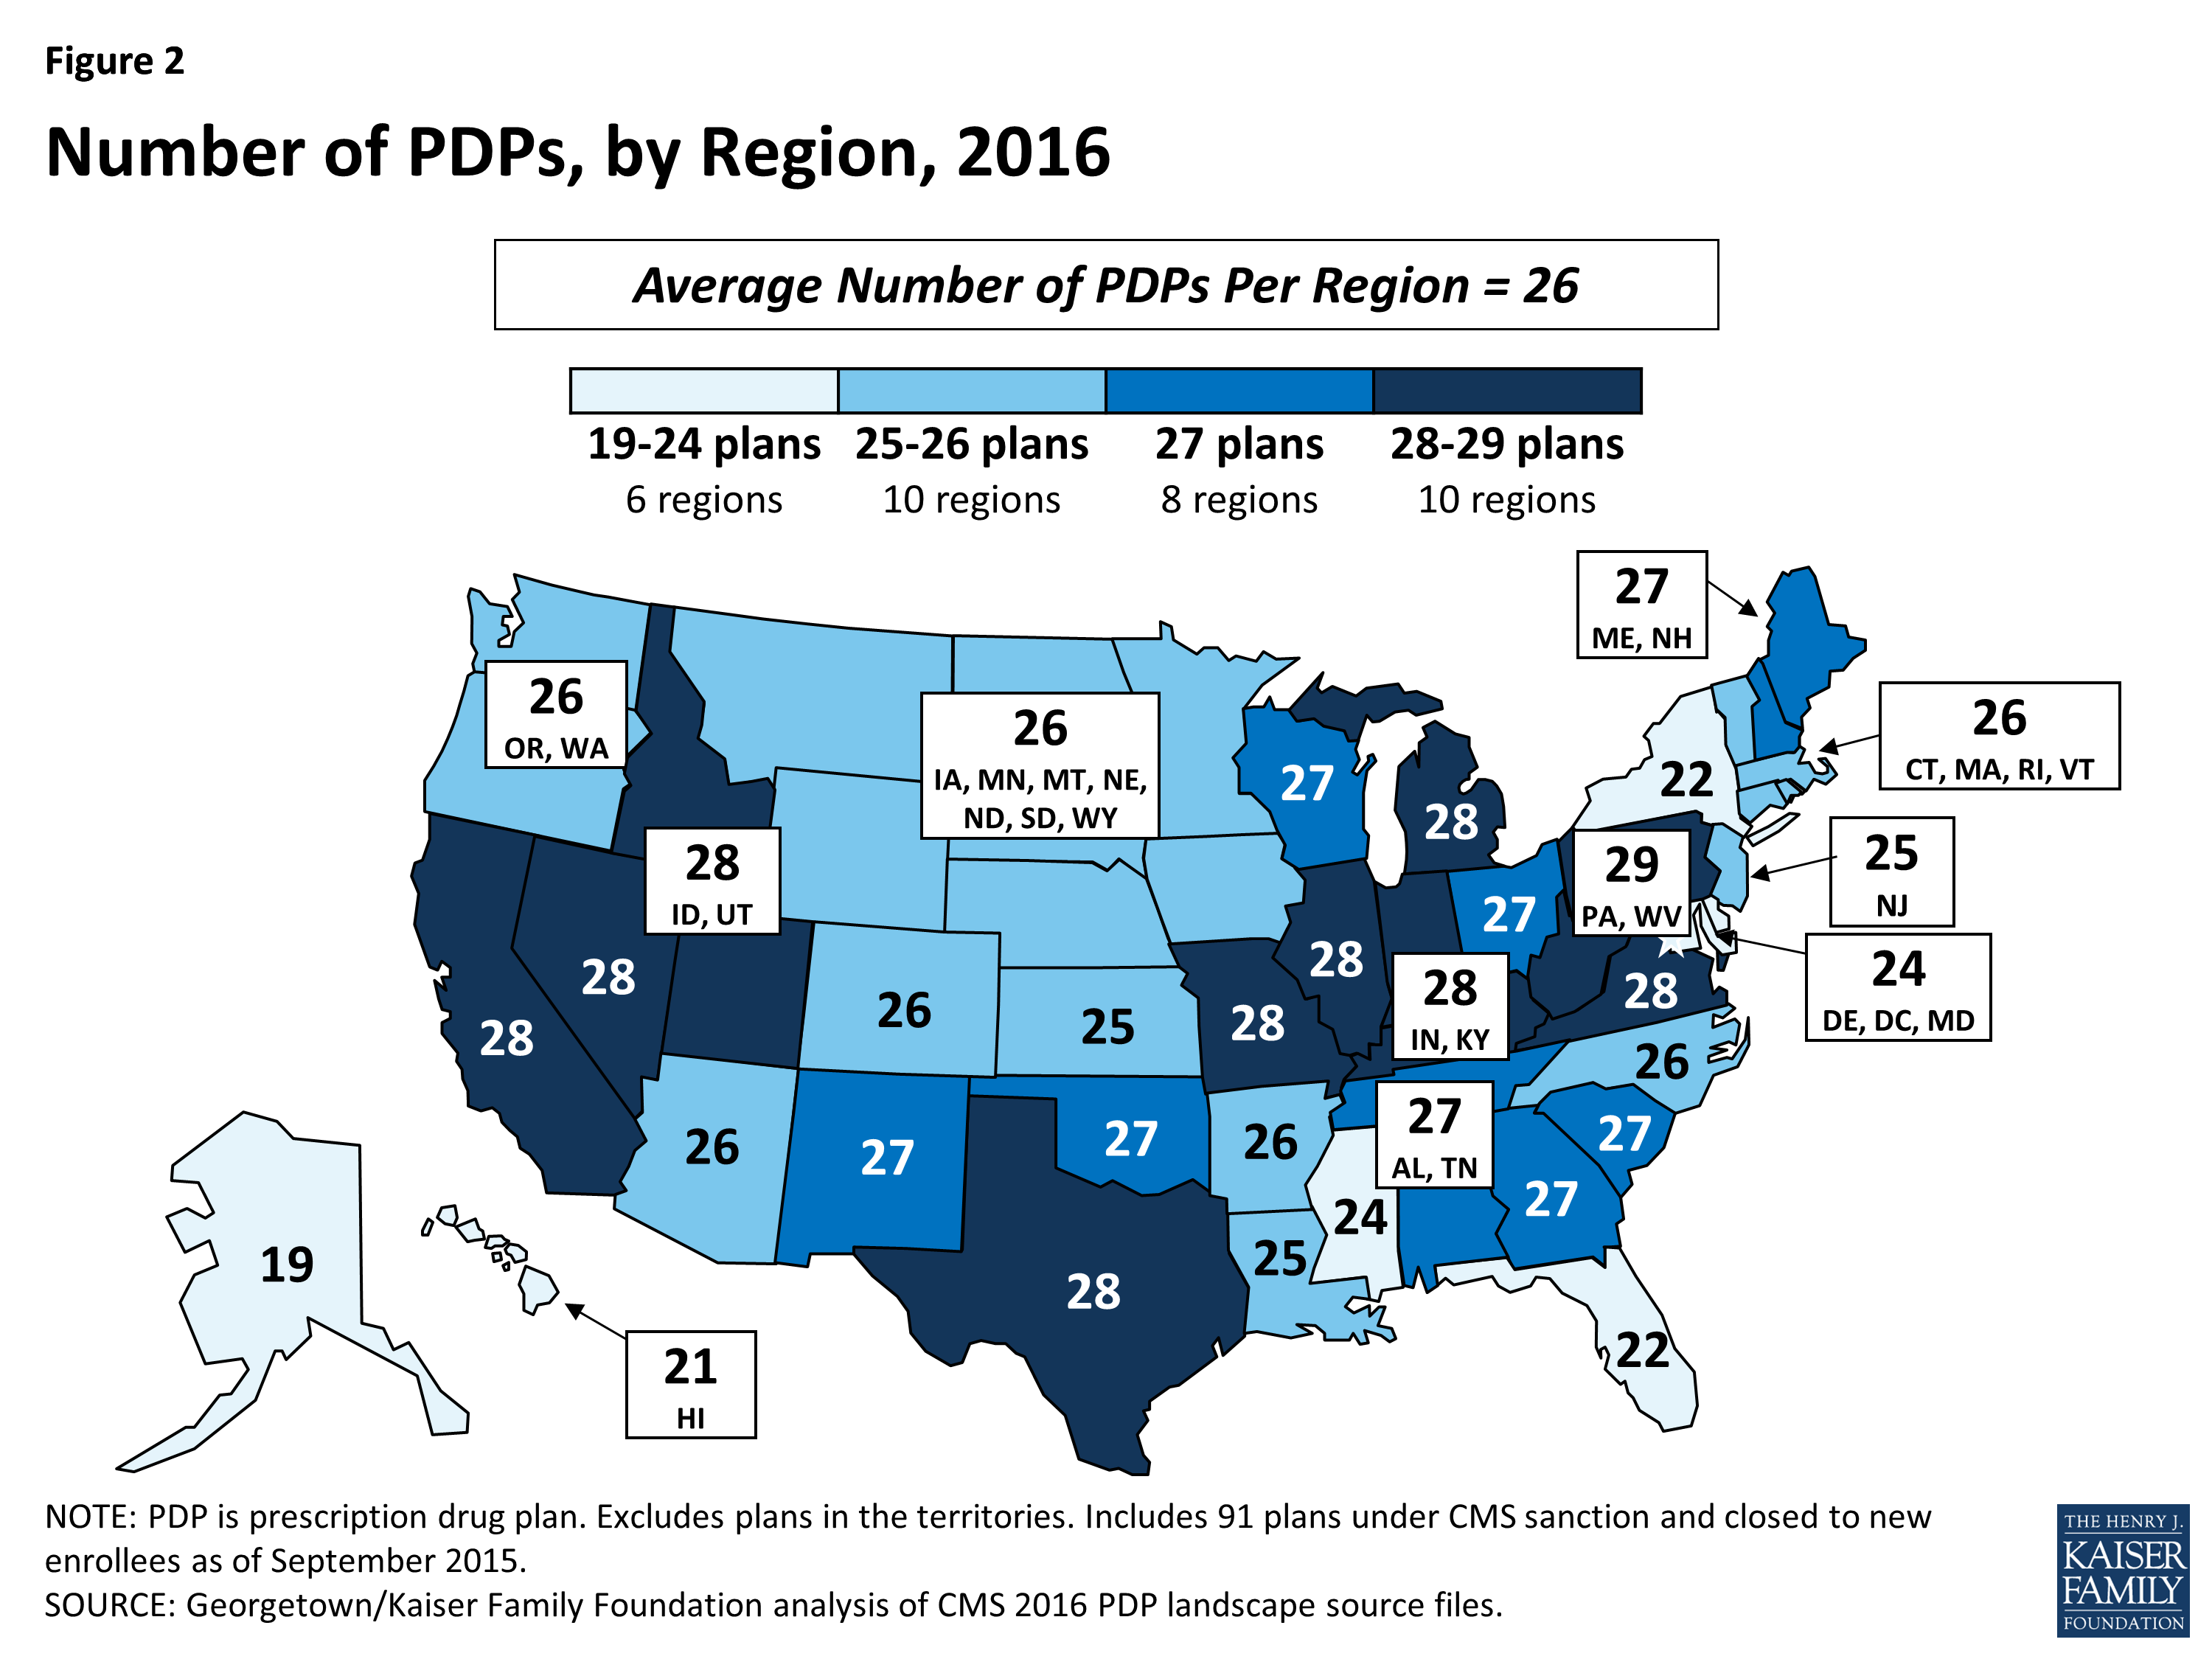 Medicare Part D A First Look at Plan Offerings in 2016 Findings